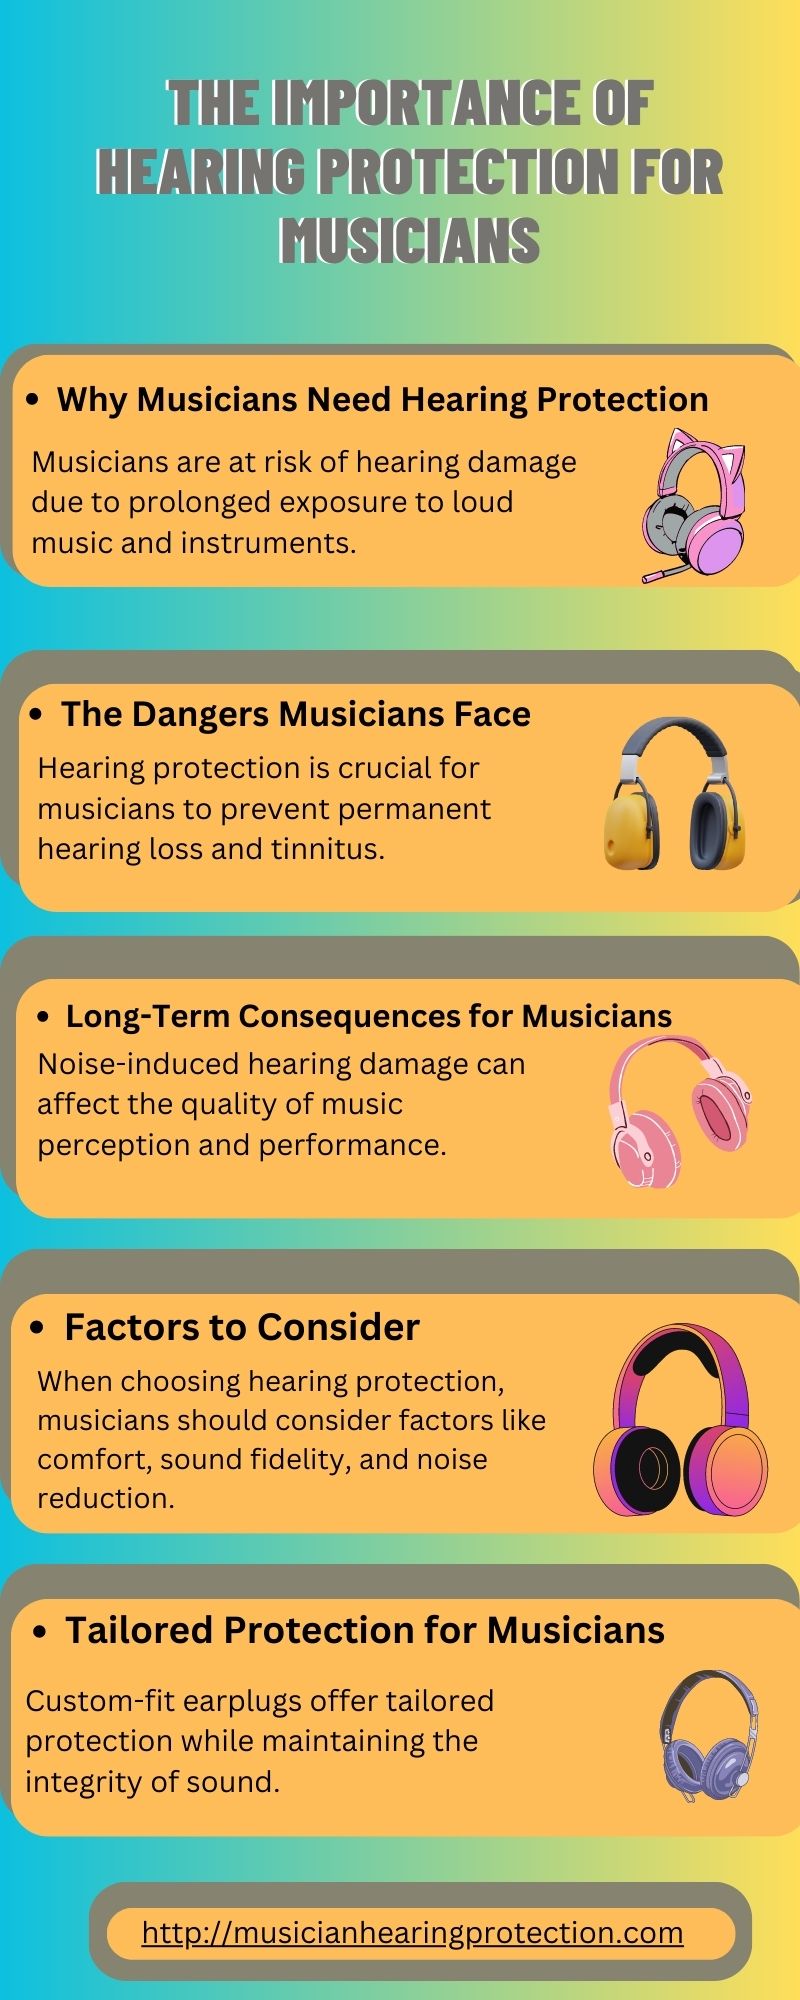 The Importance of Hearing Protection for Musicians